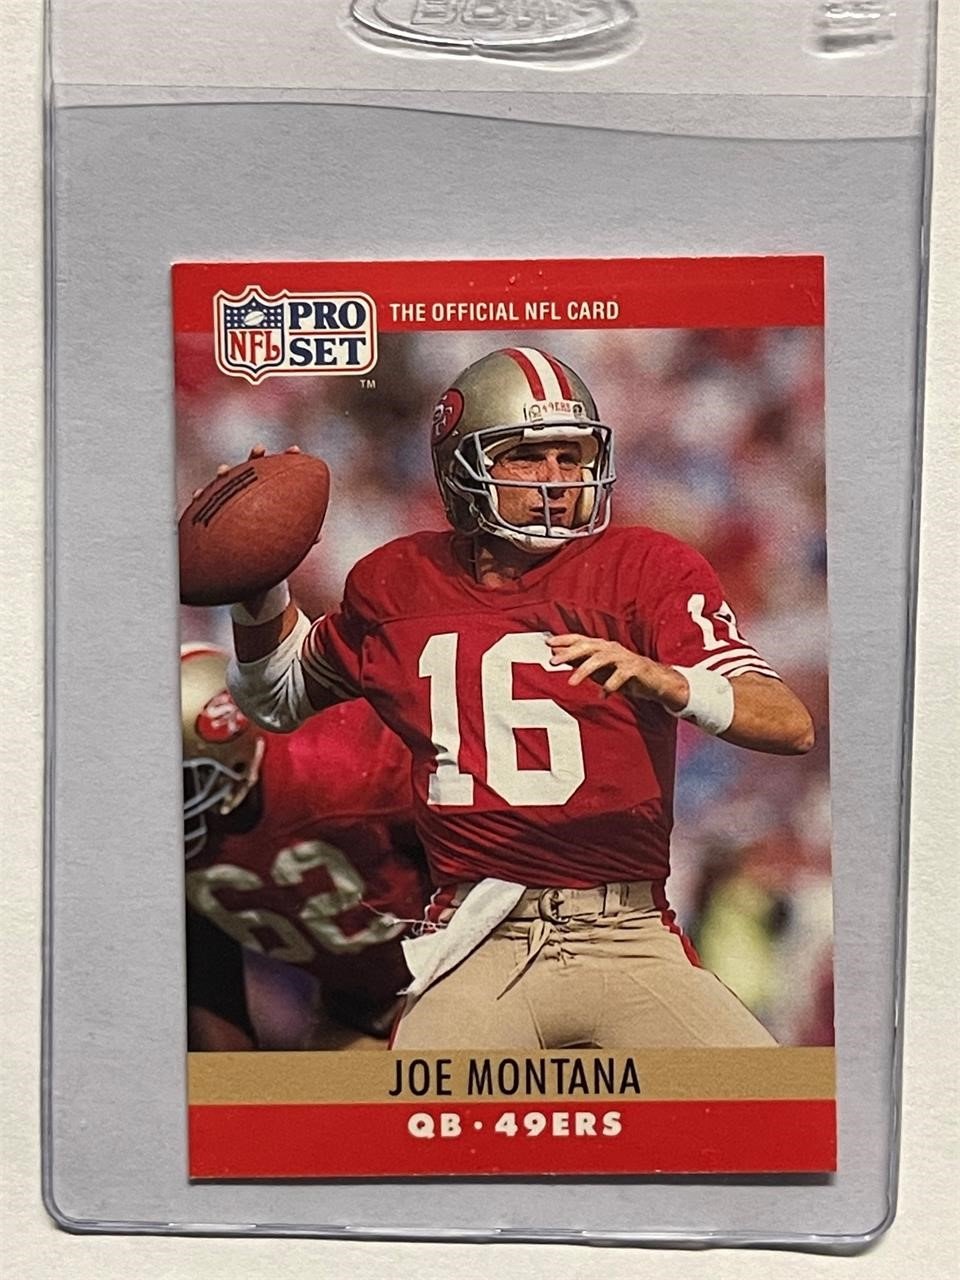 10 JA ALL AMERICAN AUCTION COLLECTIBLES AND MORE